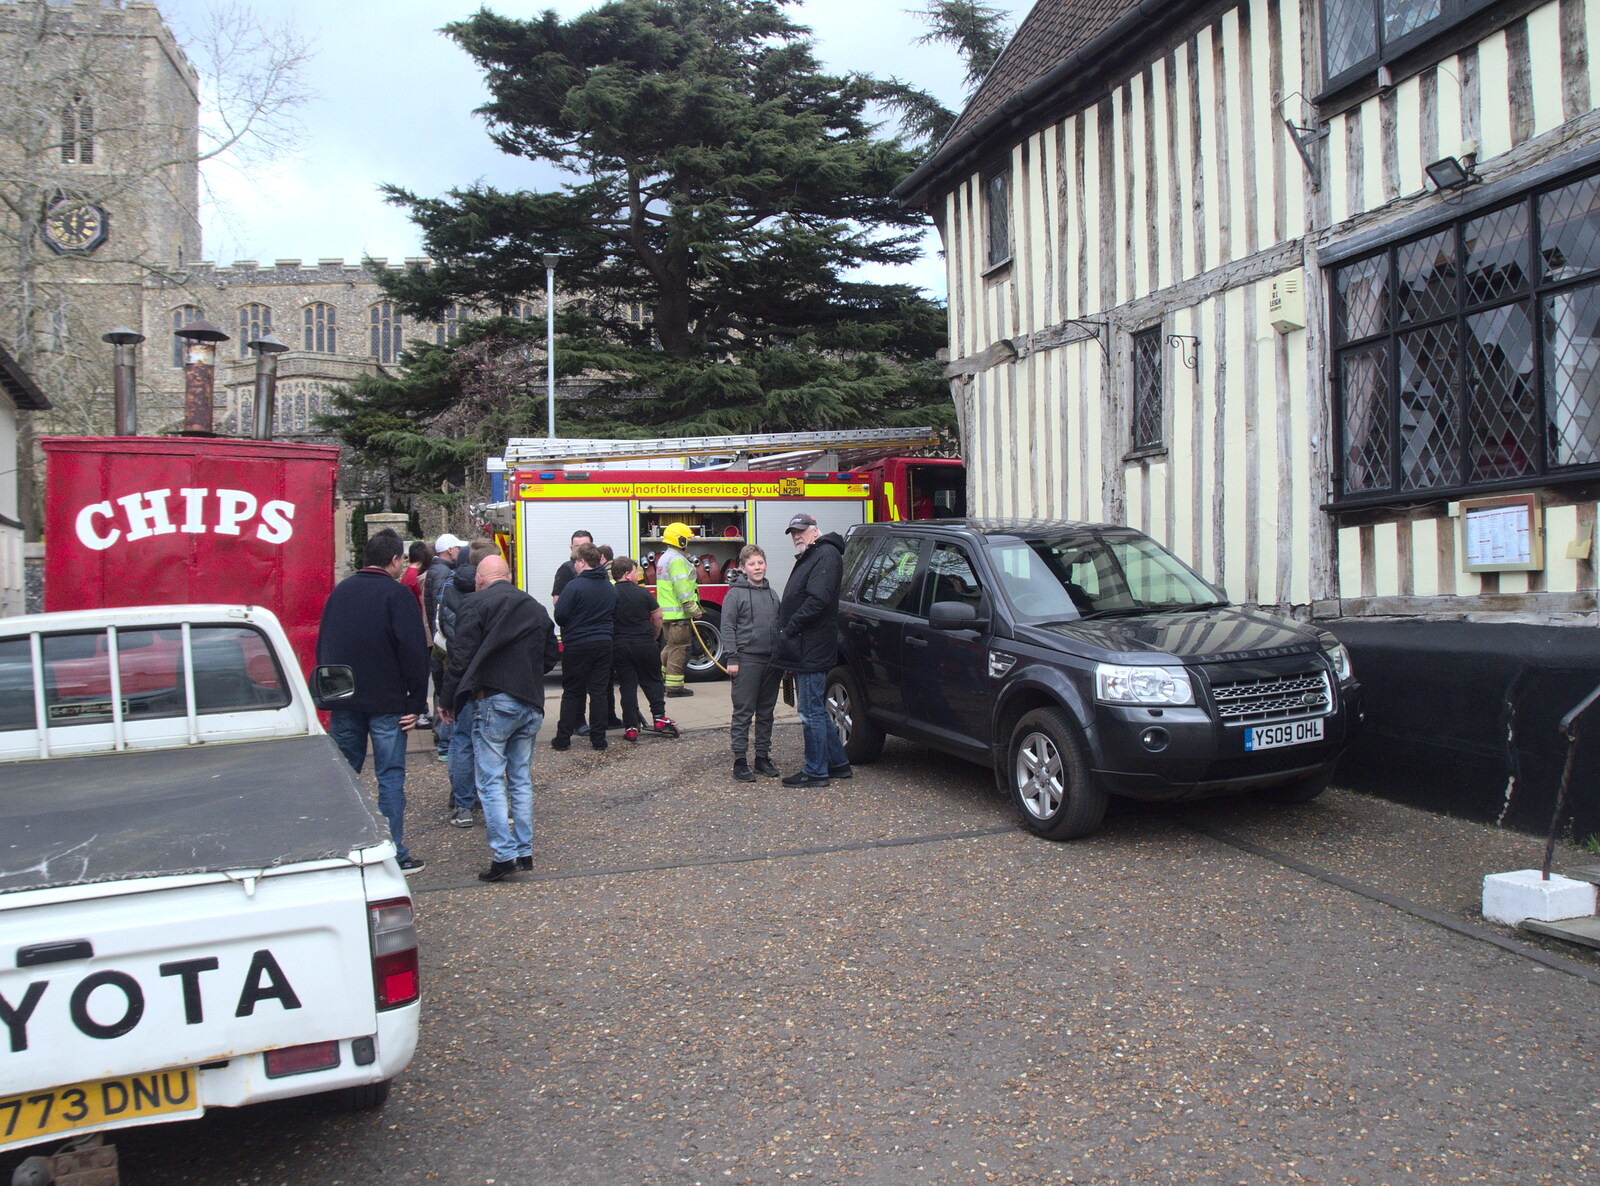 There's a commotion outside Dolphin House in Diss from Dolphin House Fire and an Escape Room, Diss and Norwich - 26th March 2023